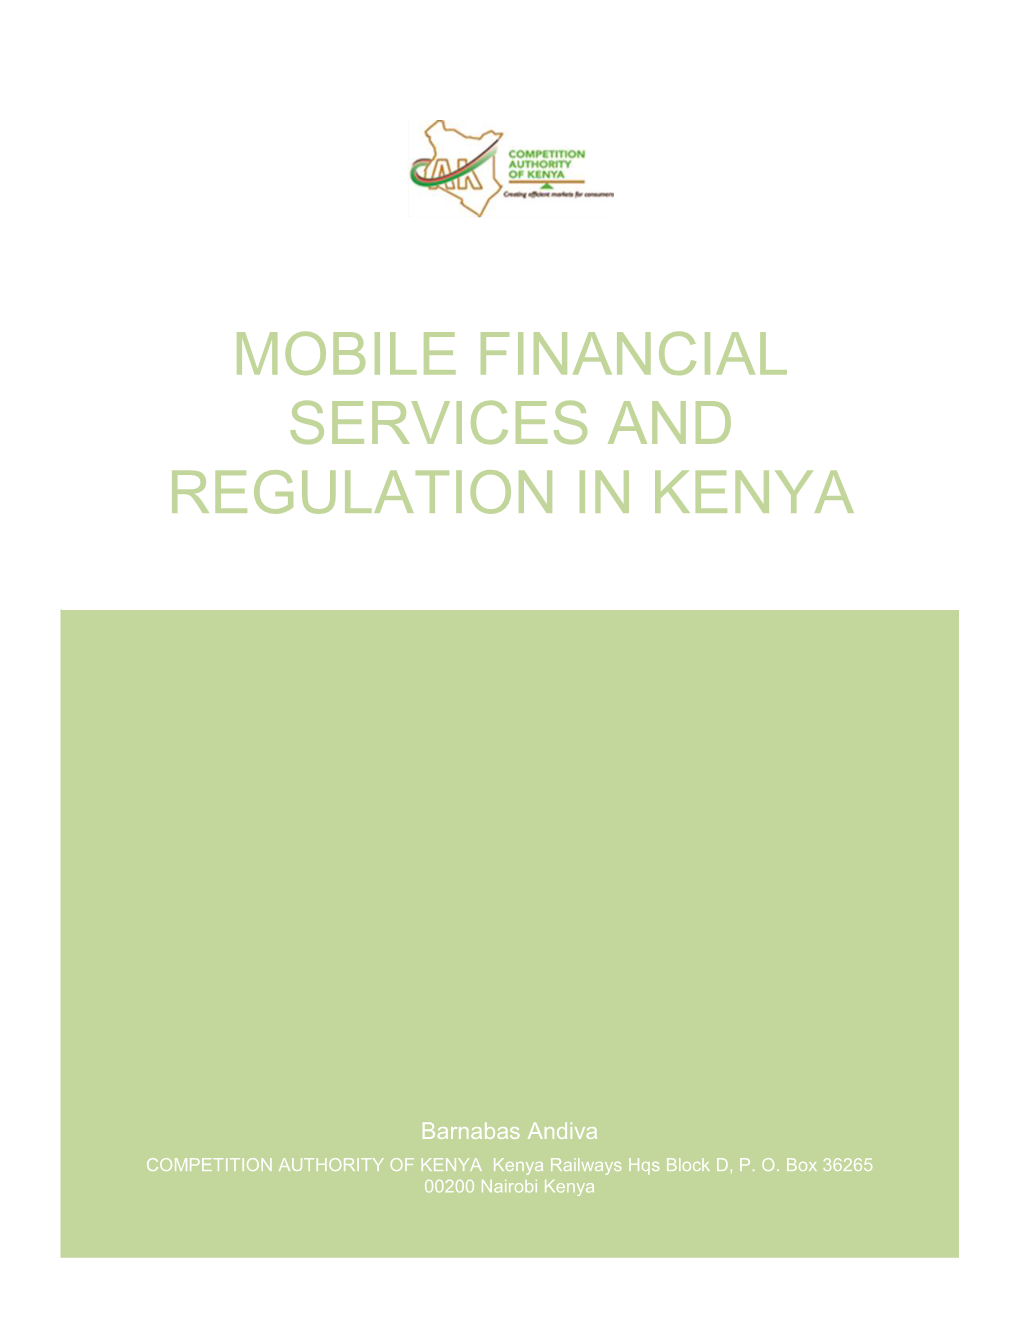 Mobile Financial Services and Regulation in Kenya